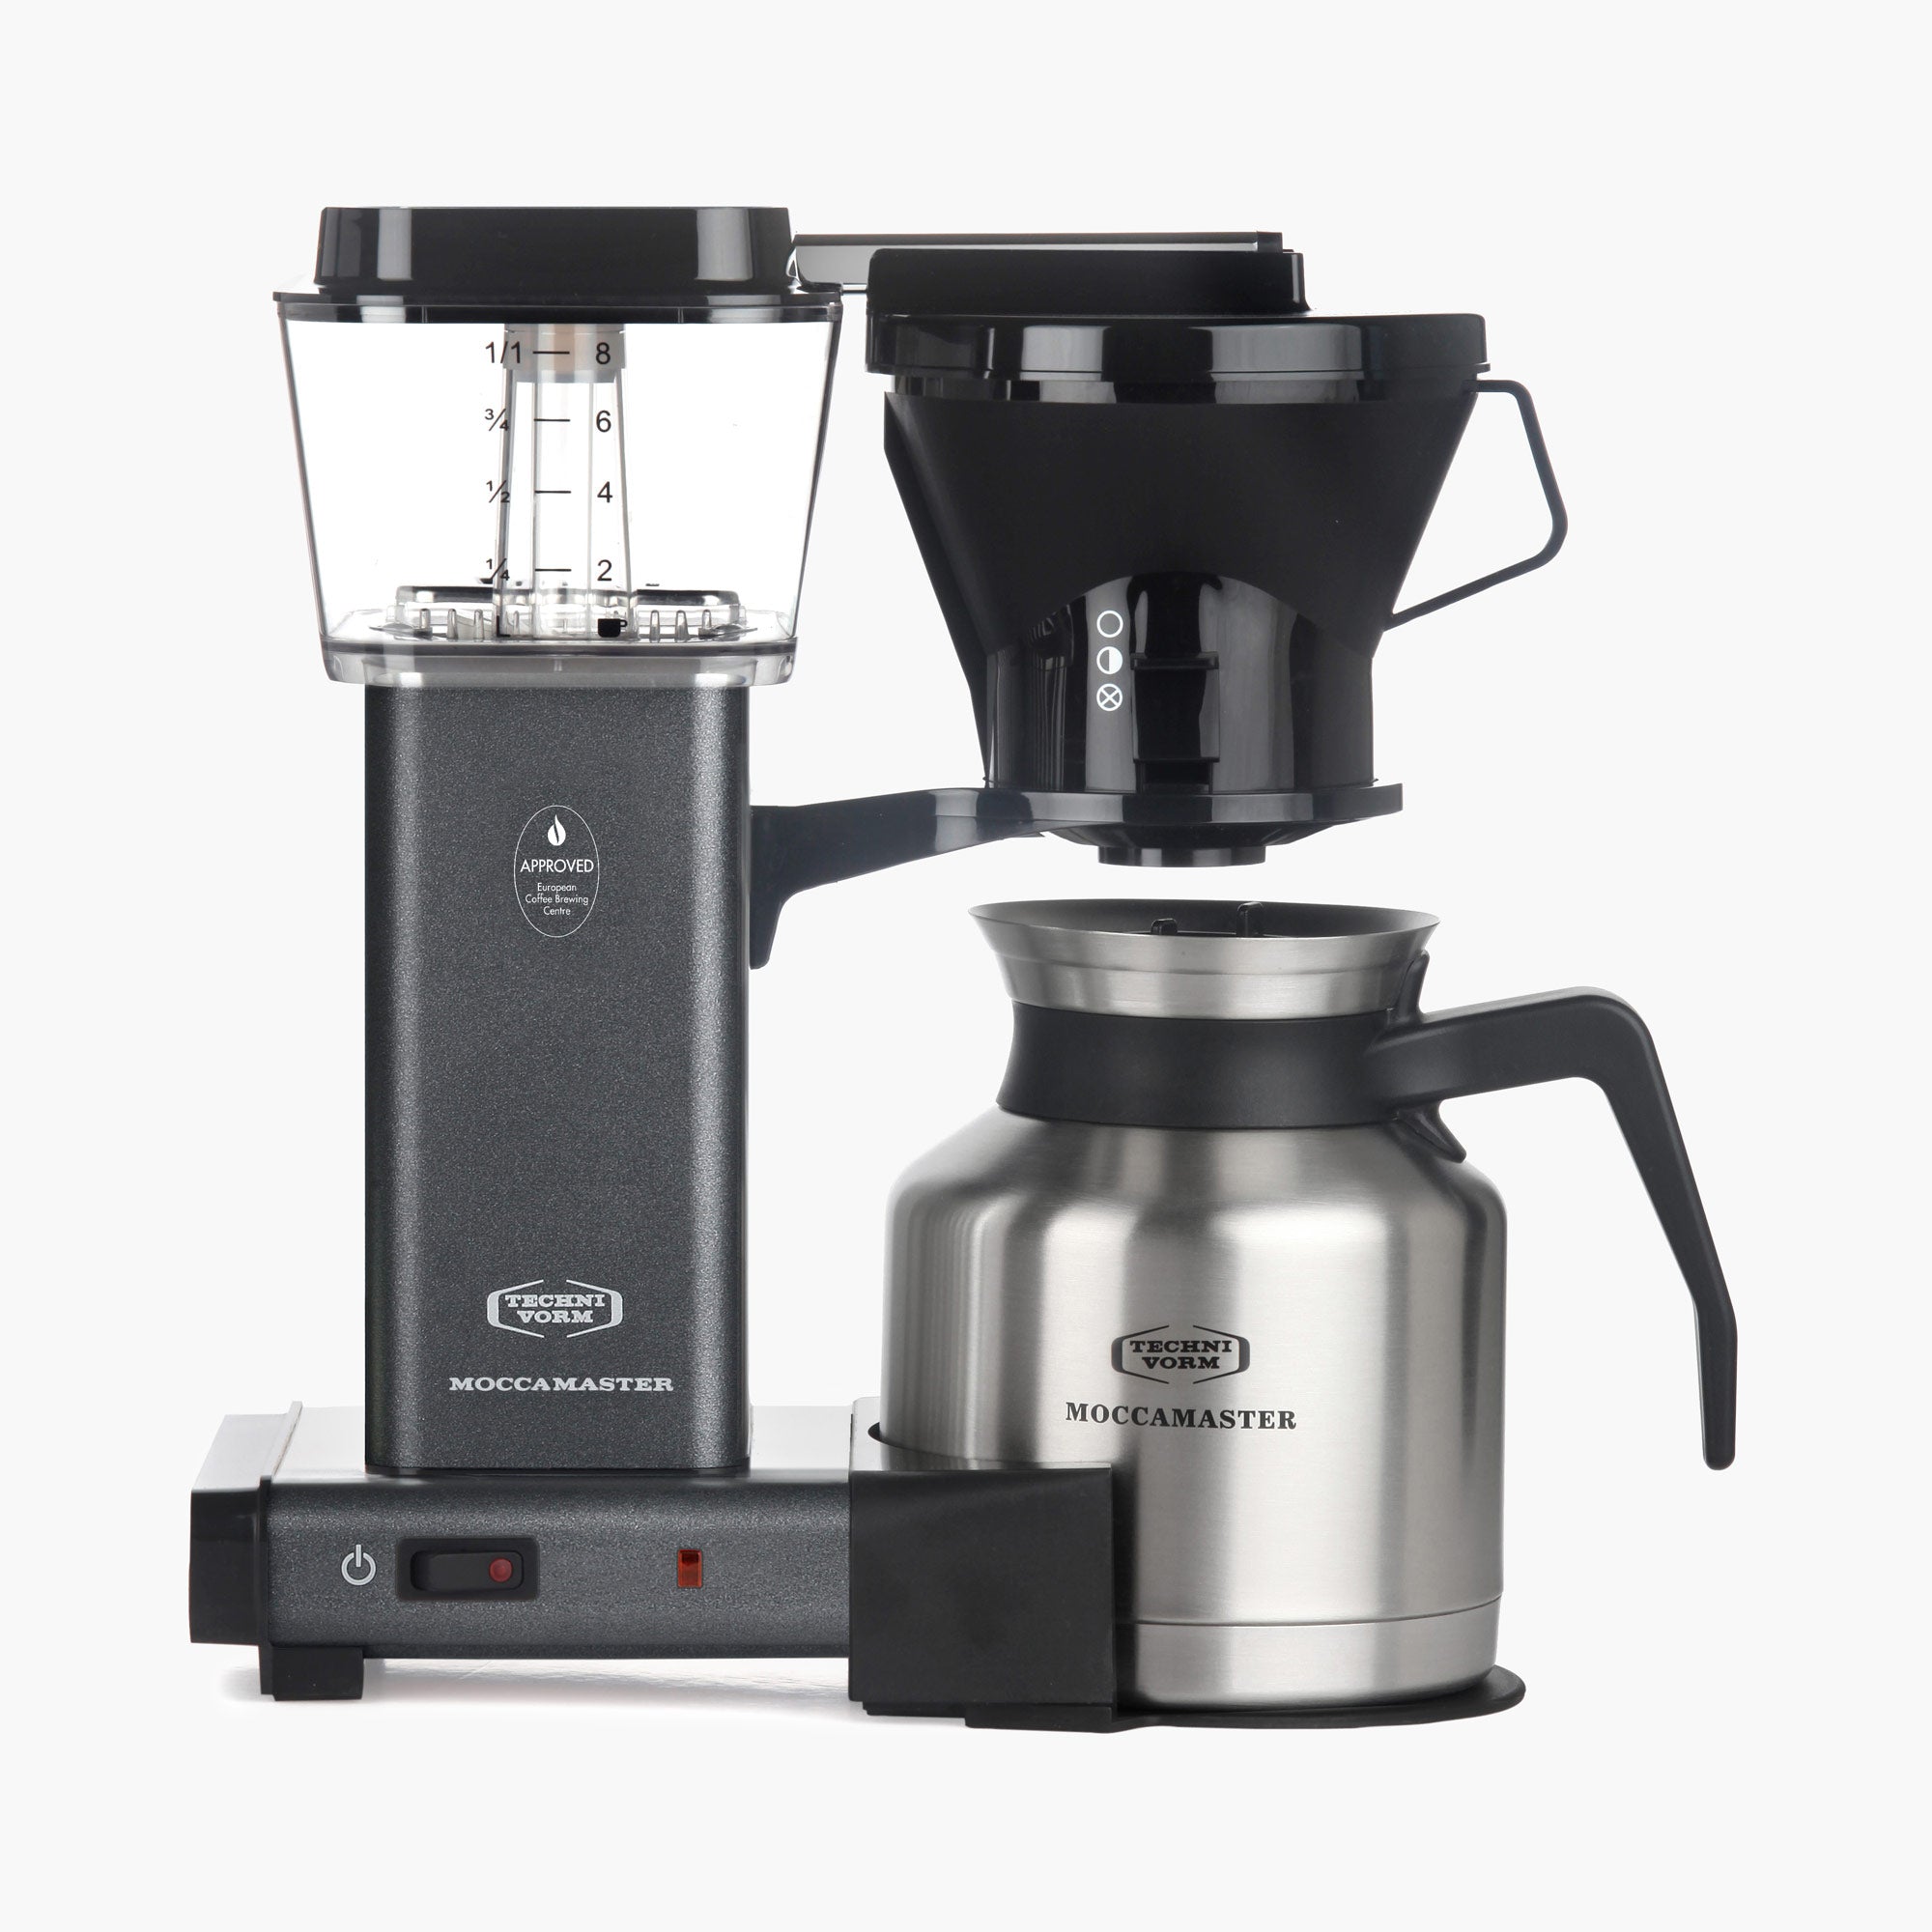 SOLD] Moccamaster KBTS Coffee Brewer - Buy/Sell